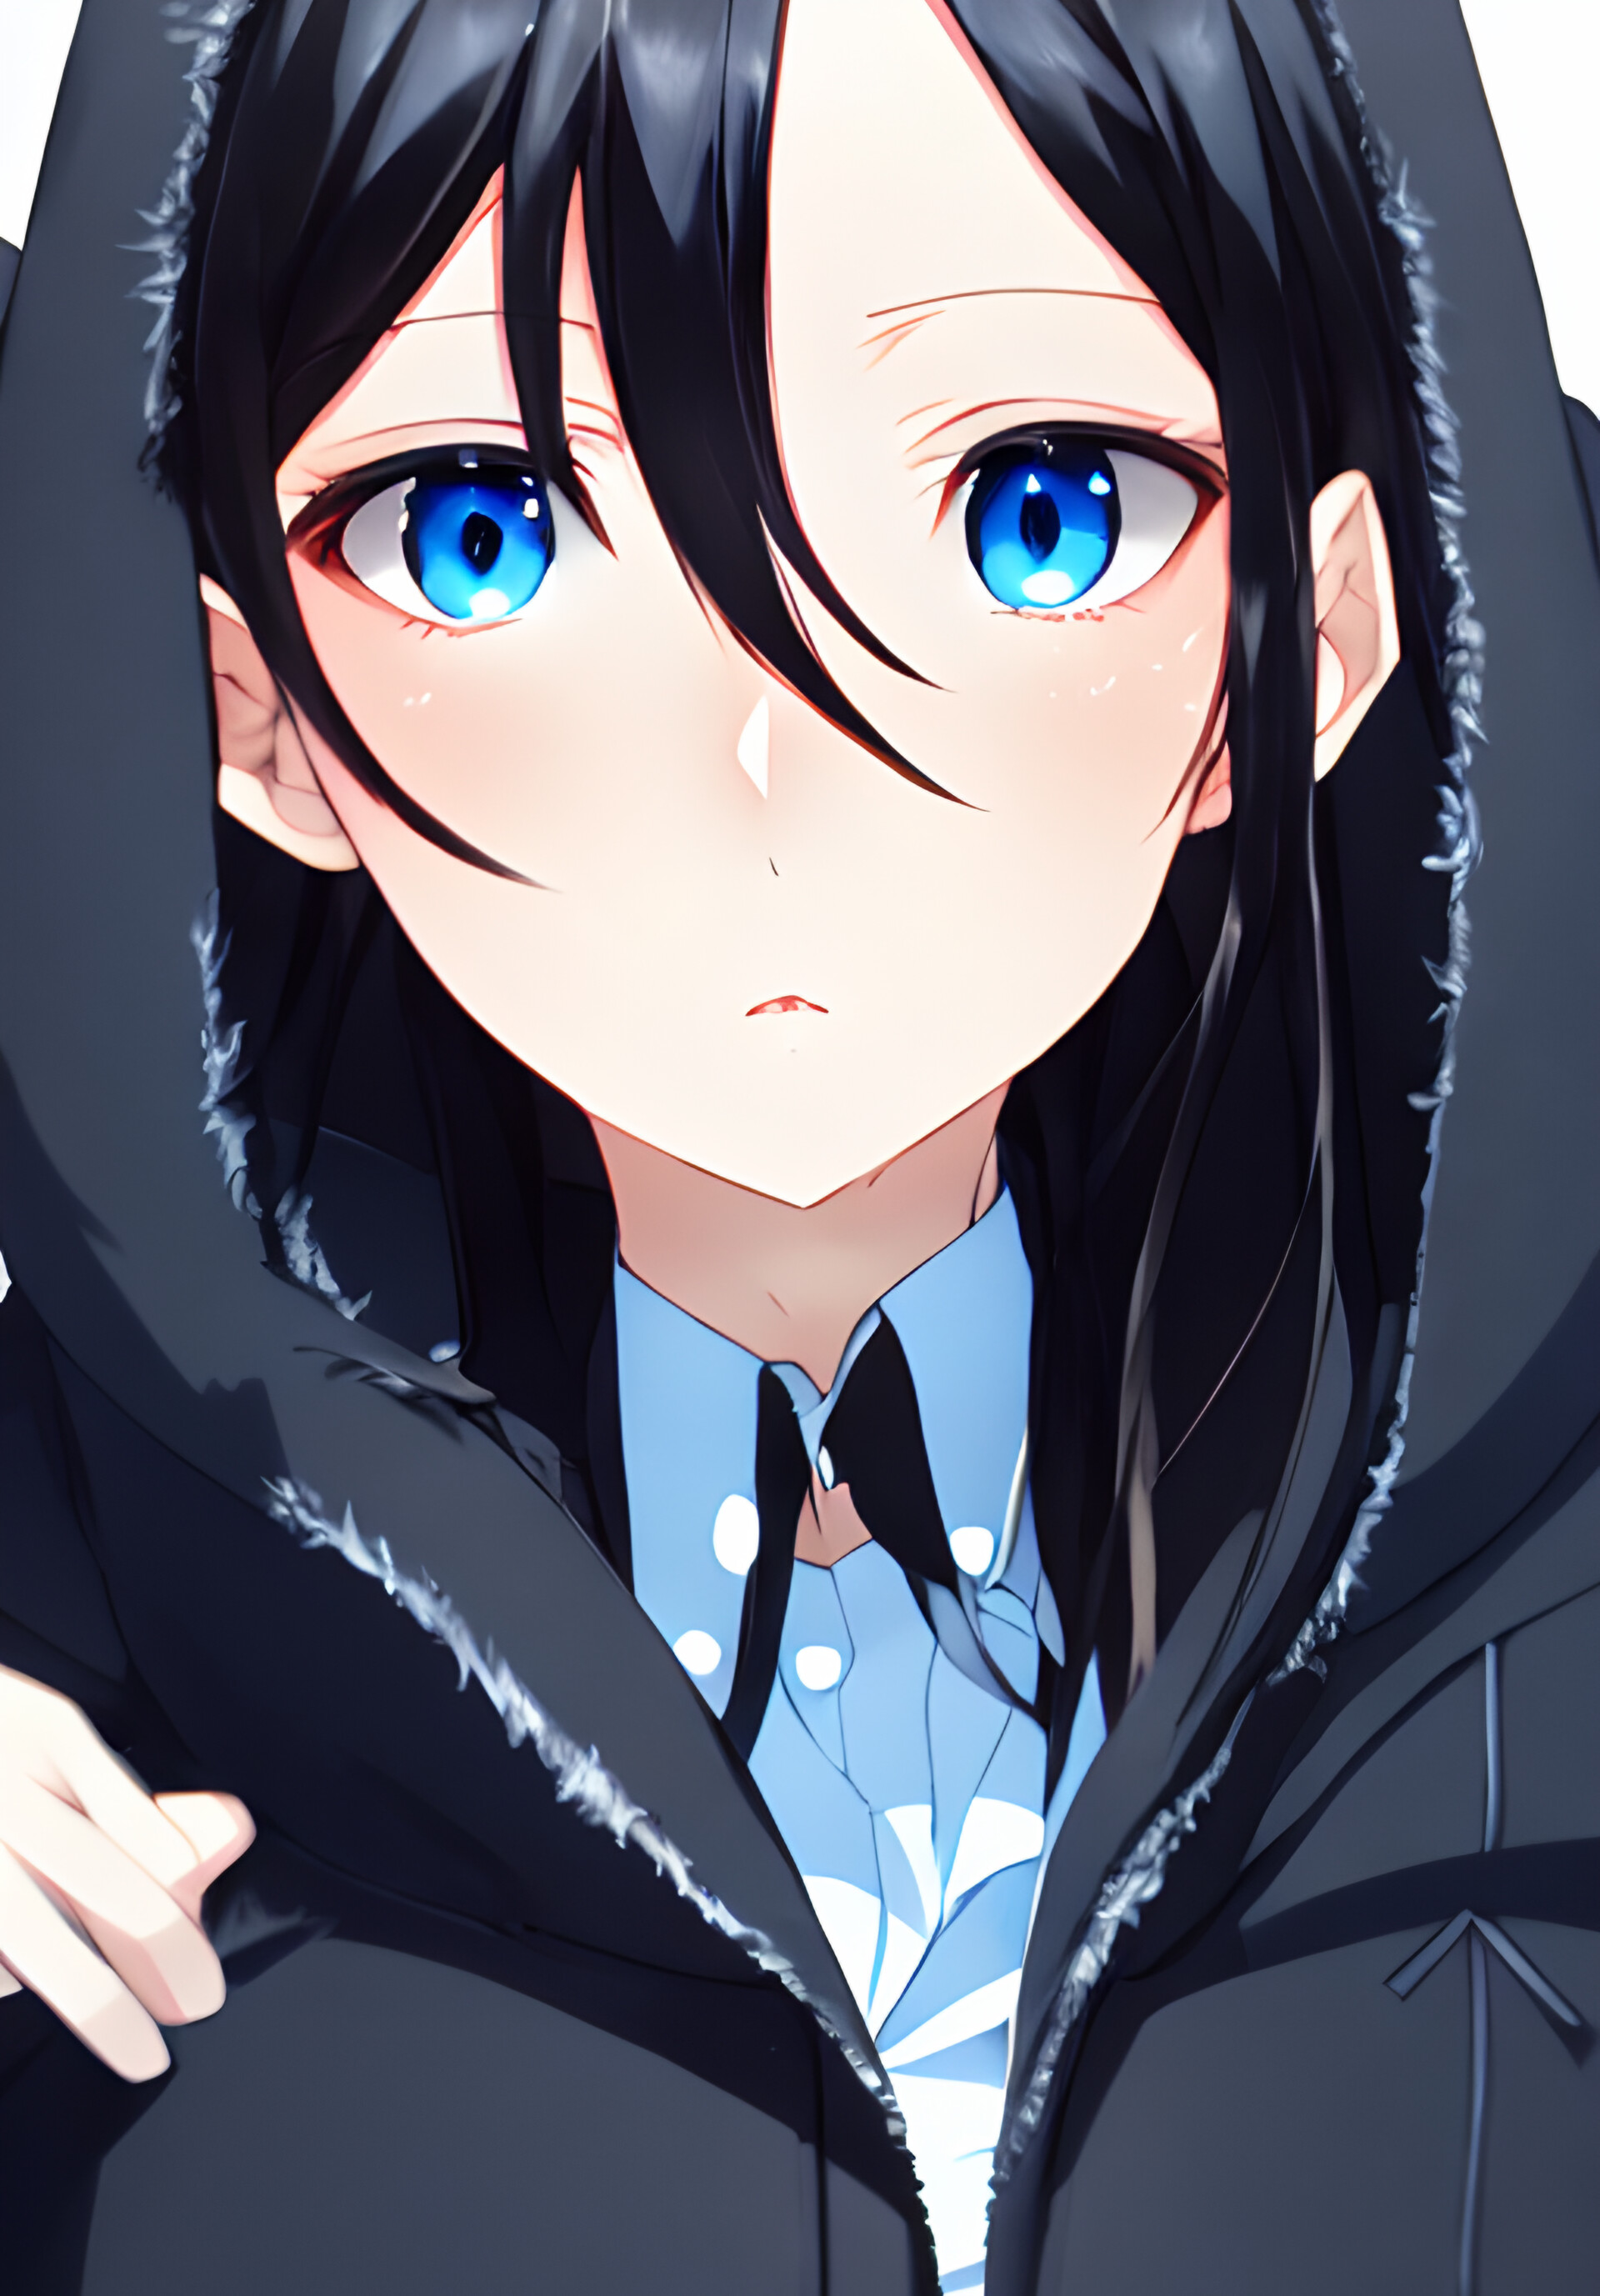 Top 9 Anime Girl With Black Hair And Blue Eyes  2020 Updated